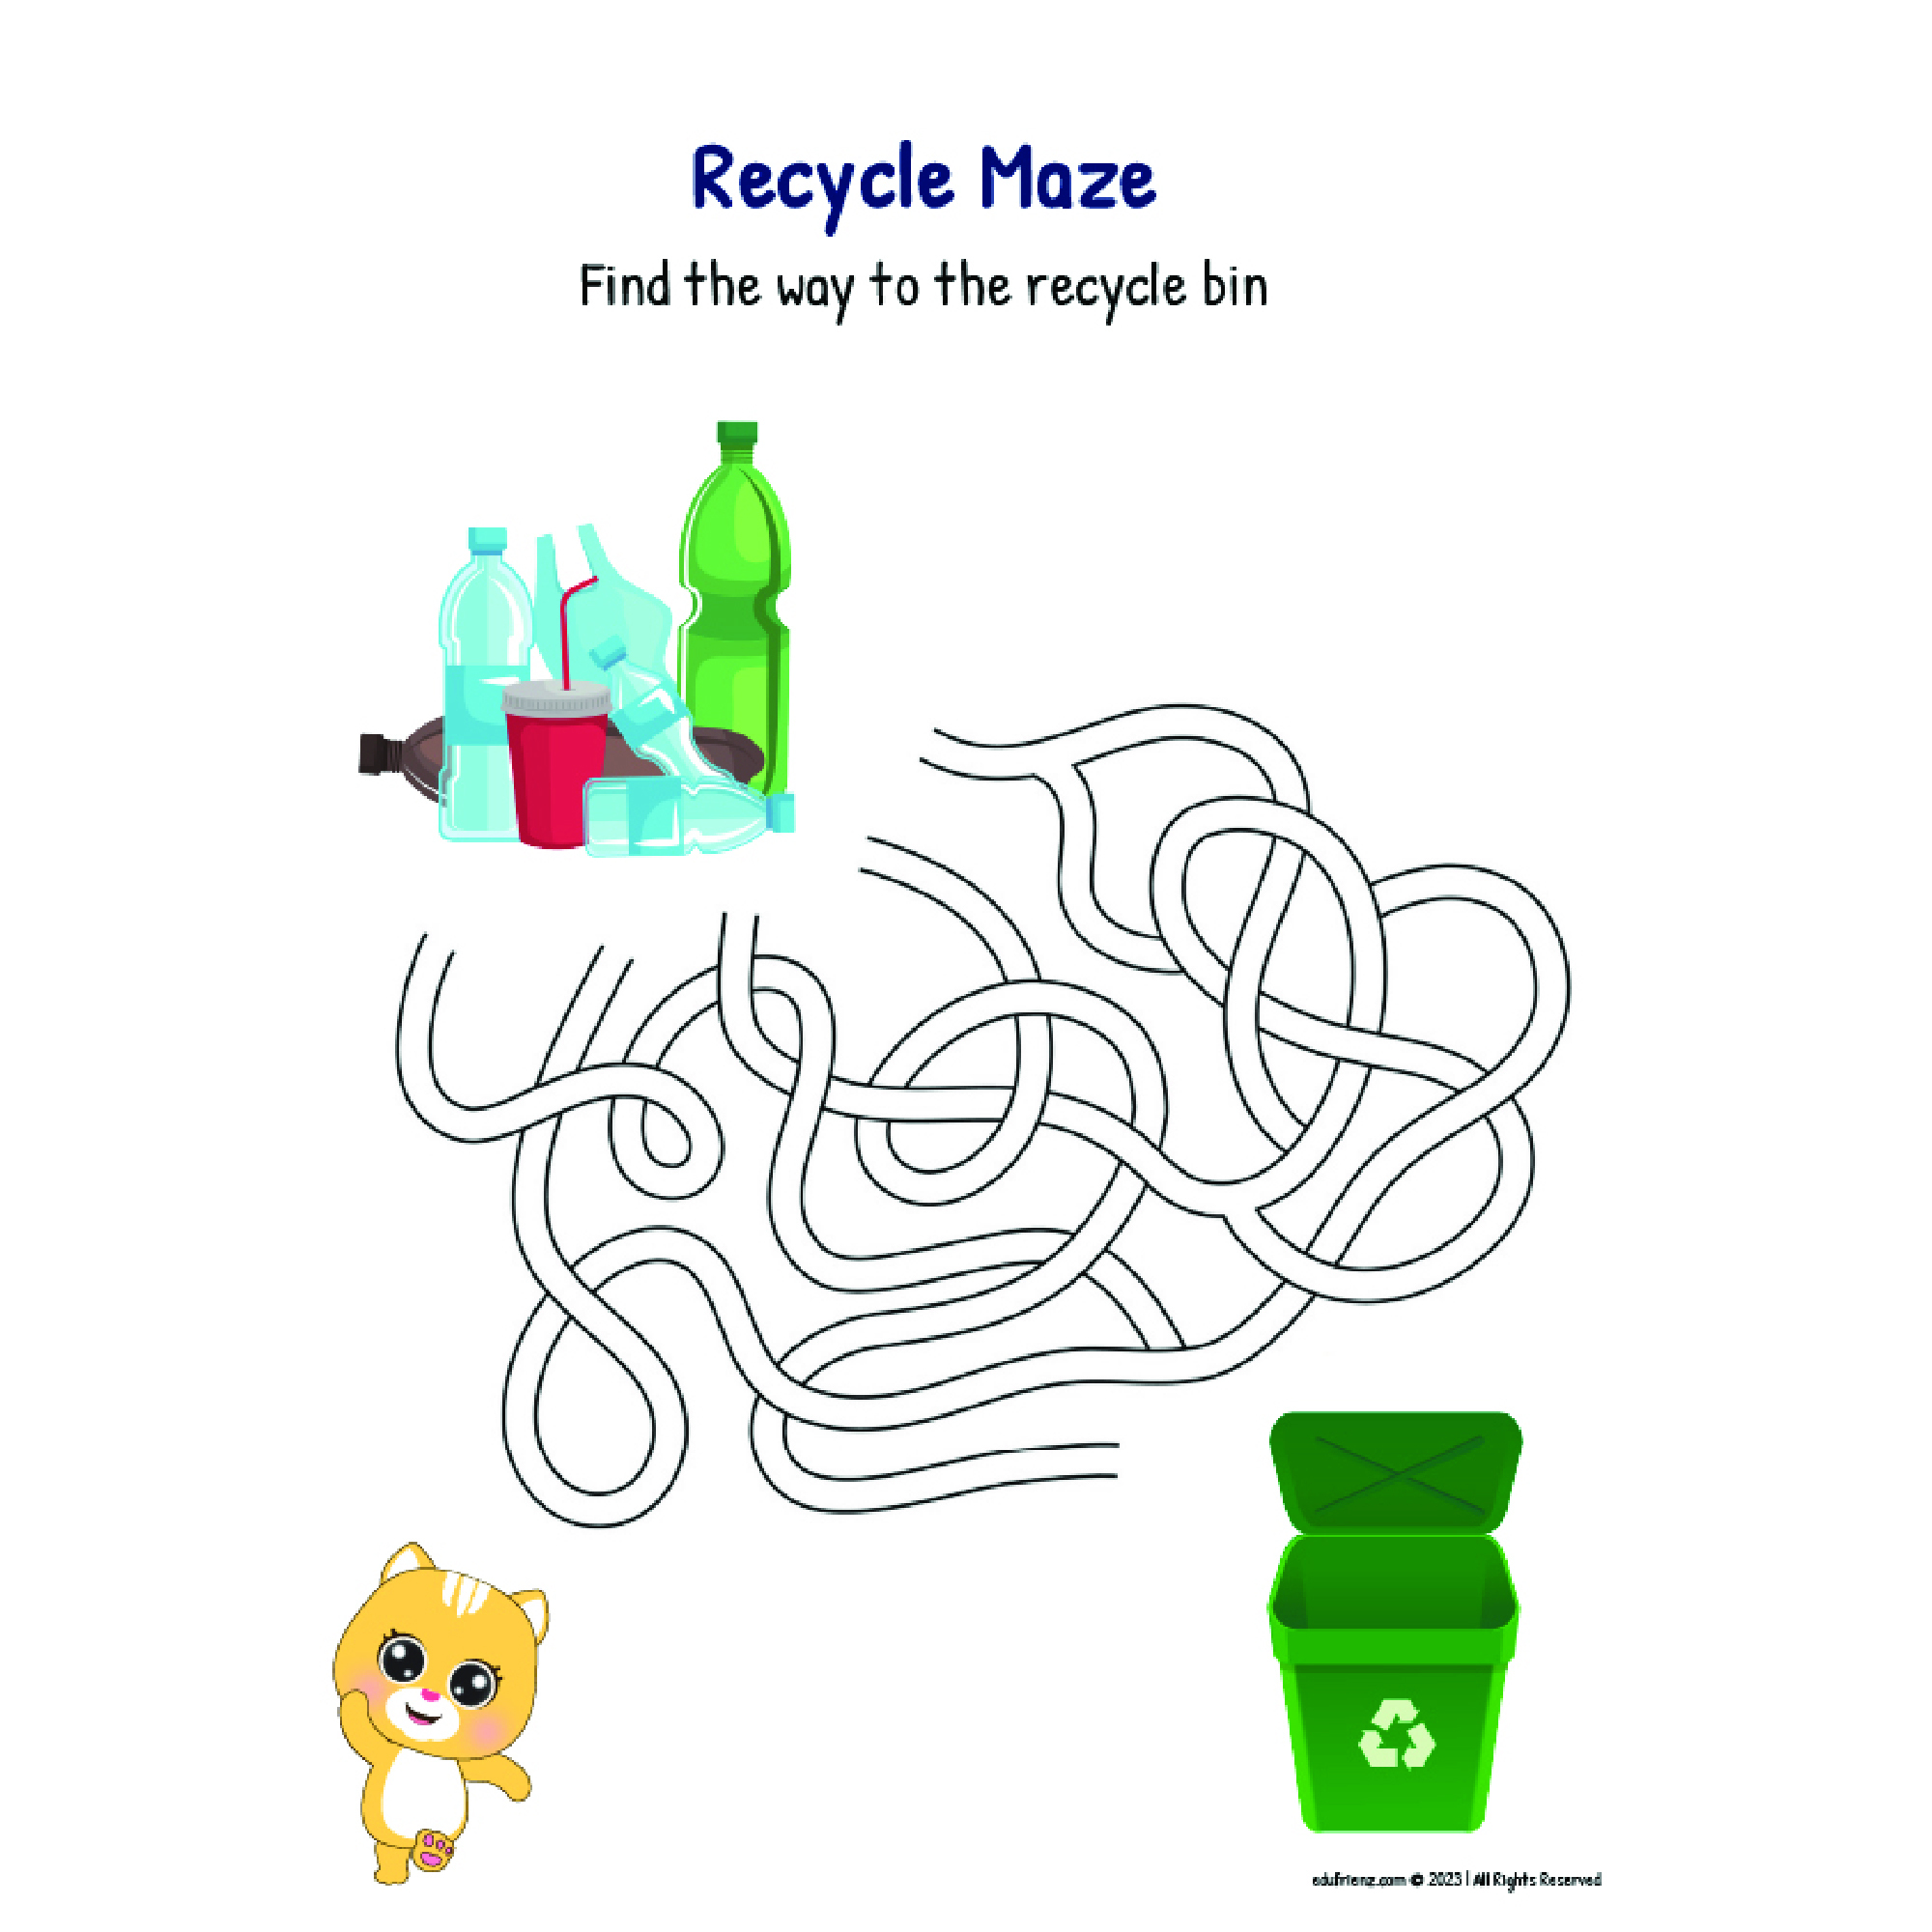 Recycling for Kids | Learn how to Reduce, Reuse, and Recycle